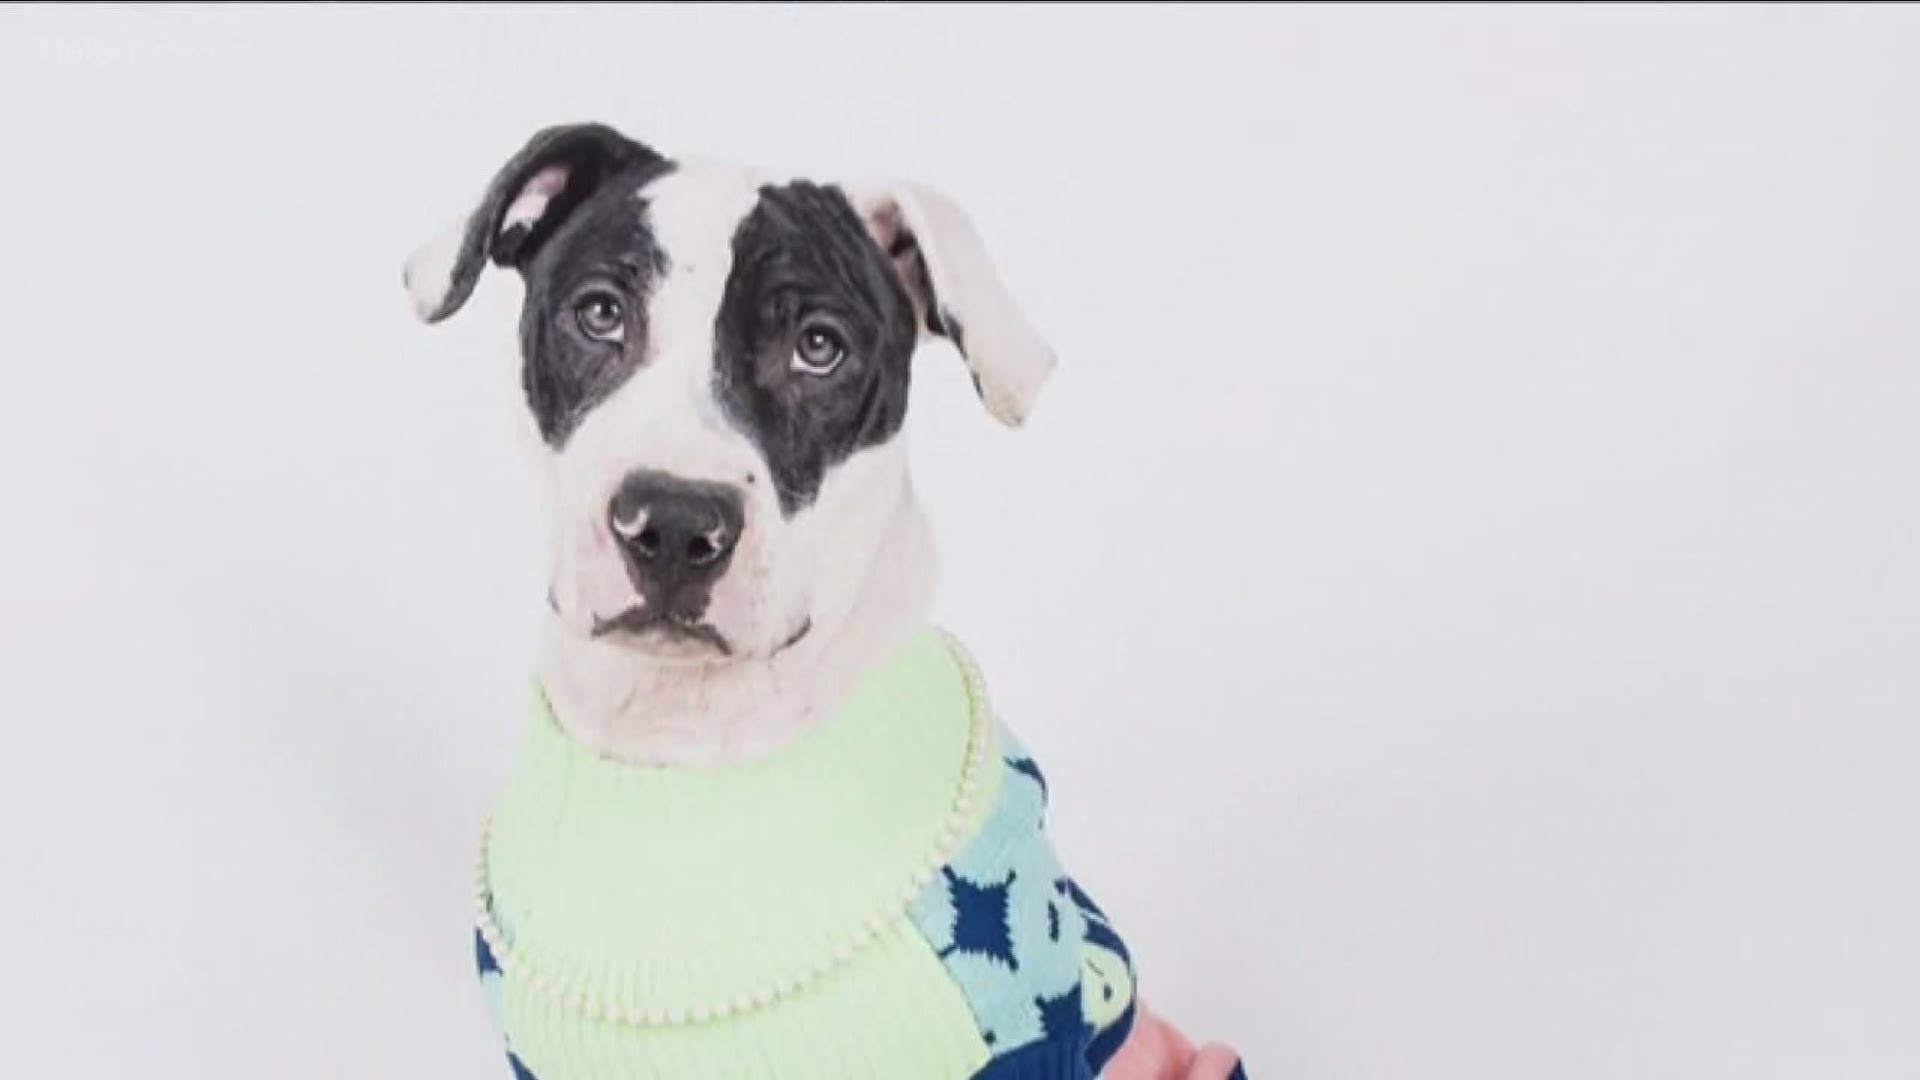 LIfeline Animal shelters are waving adoption fees for humans who come in wearing ugly Christmas sweathers.